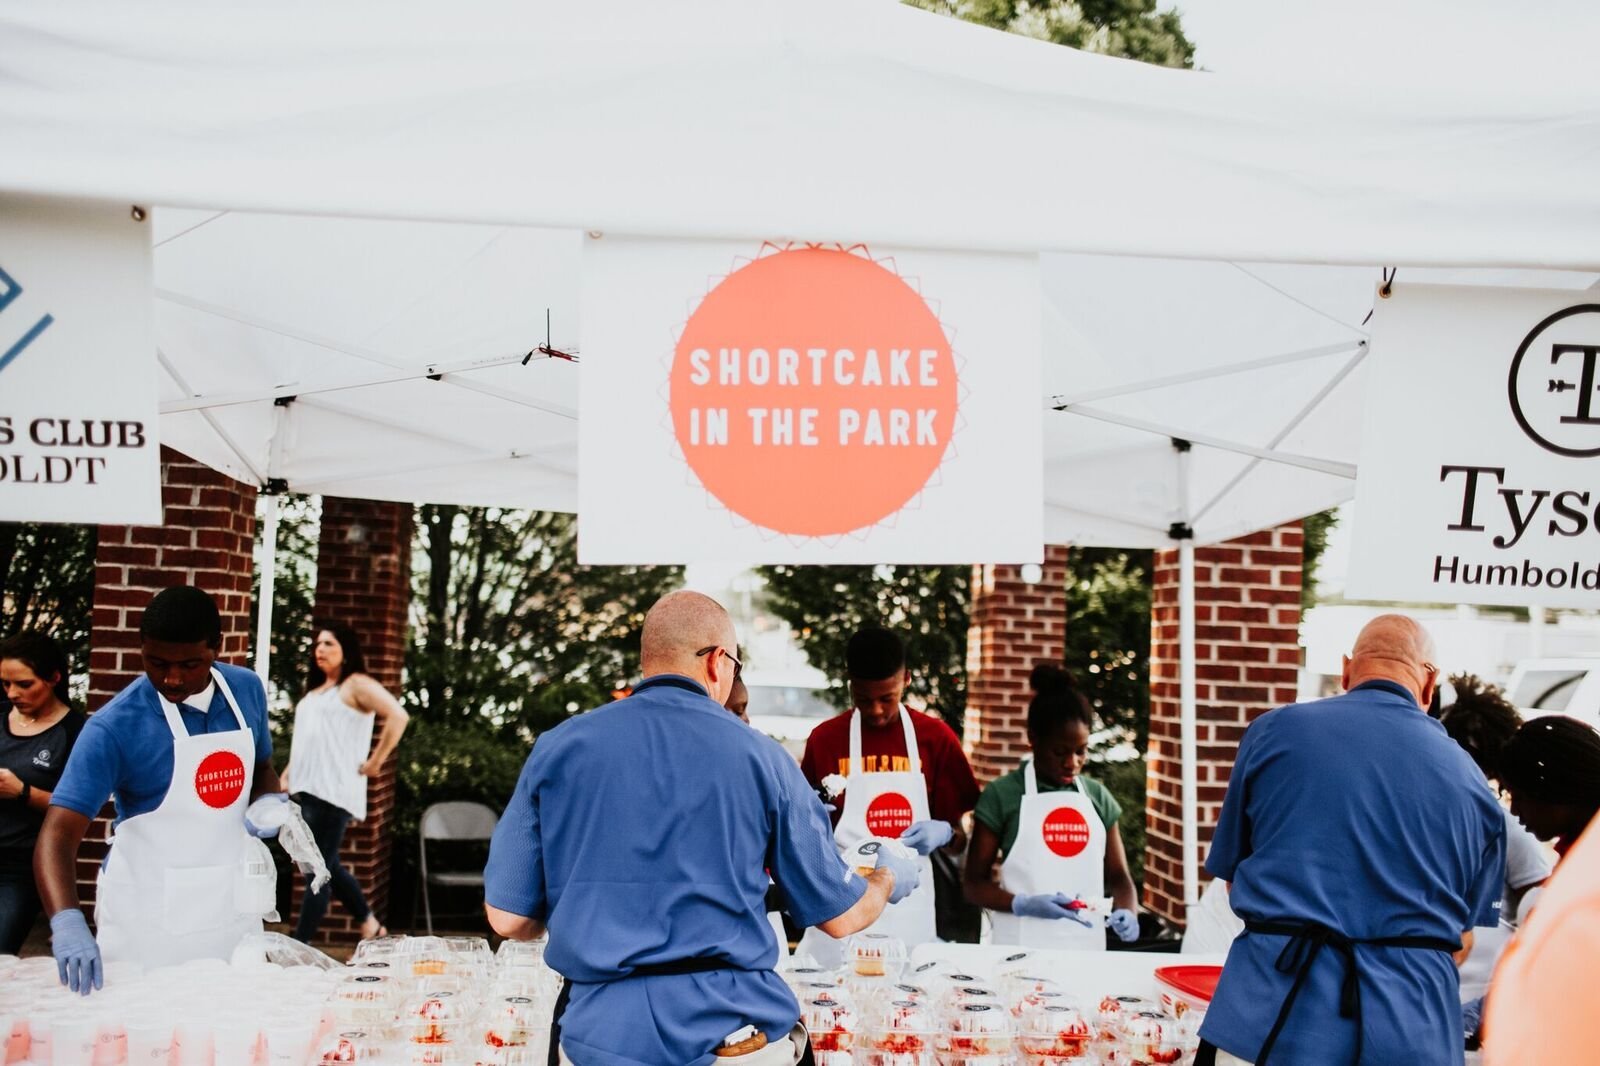 2019 West Tennessee Strawberry Festival - Shortcake in the park - 67